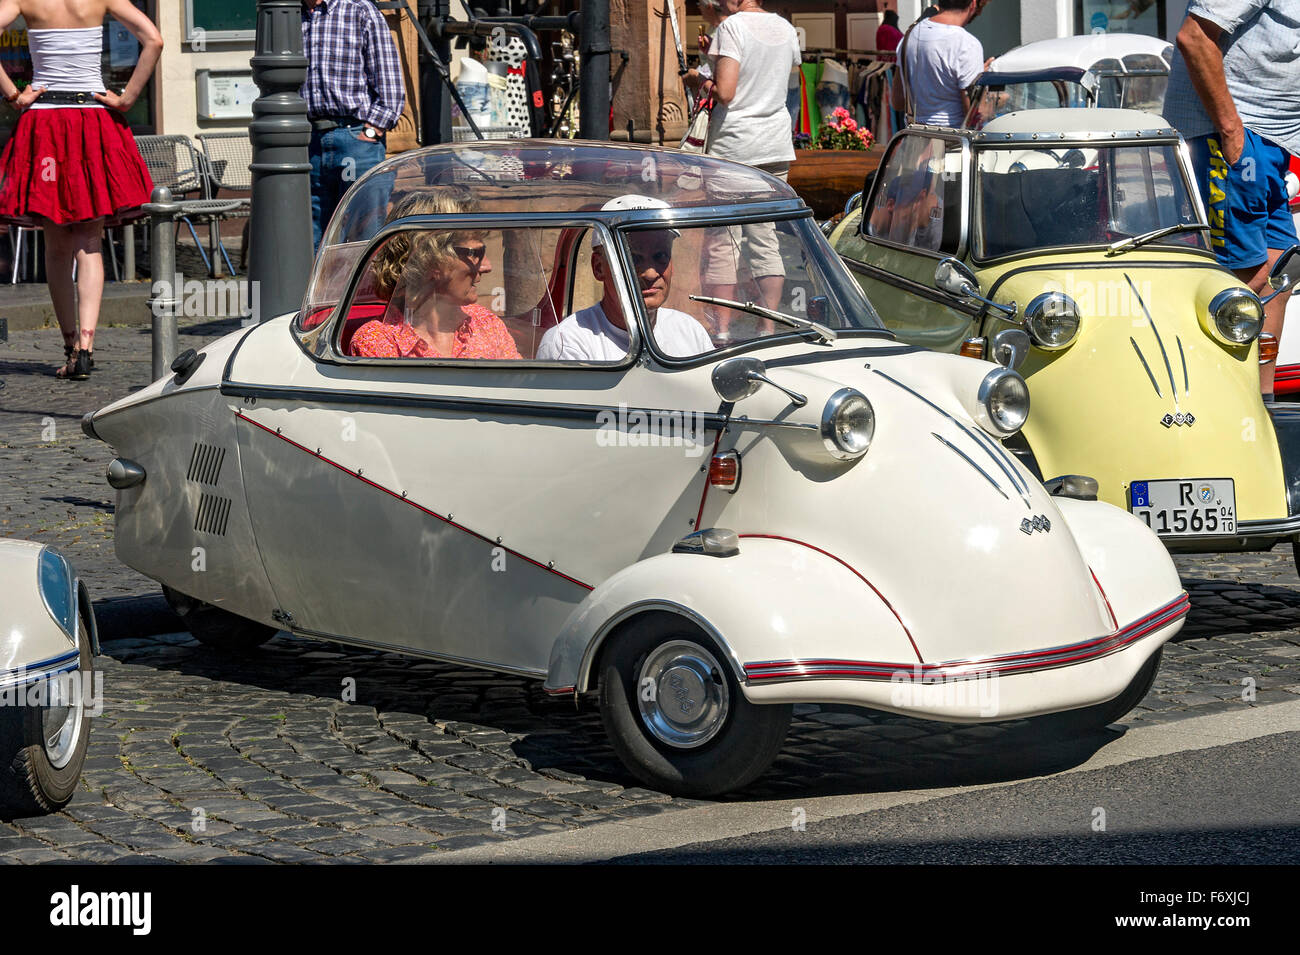 Oldtimer meeting, Vintage Messerschmitt KR 200 FMR Kabinenroller with glass roof, Roadster on the right, built in 1955-1964 Stock Photo